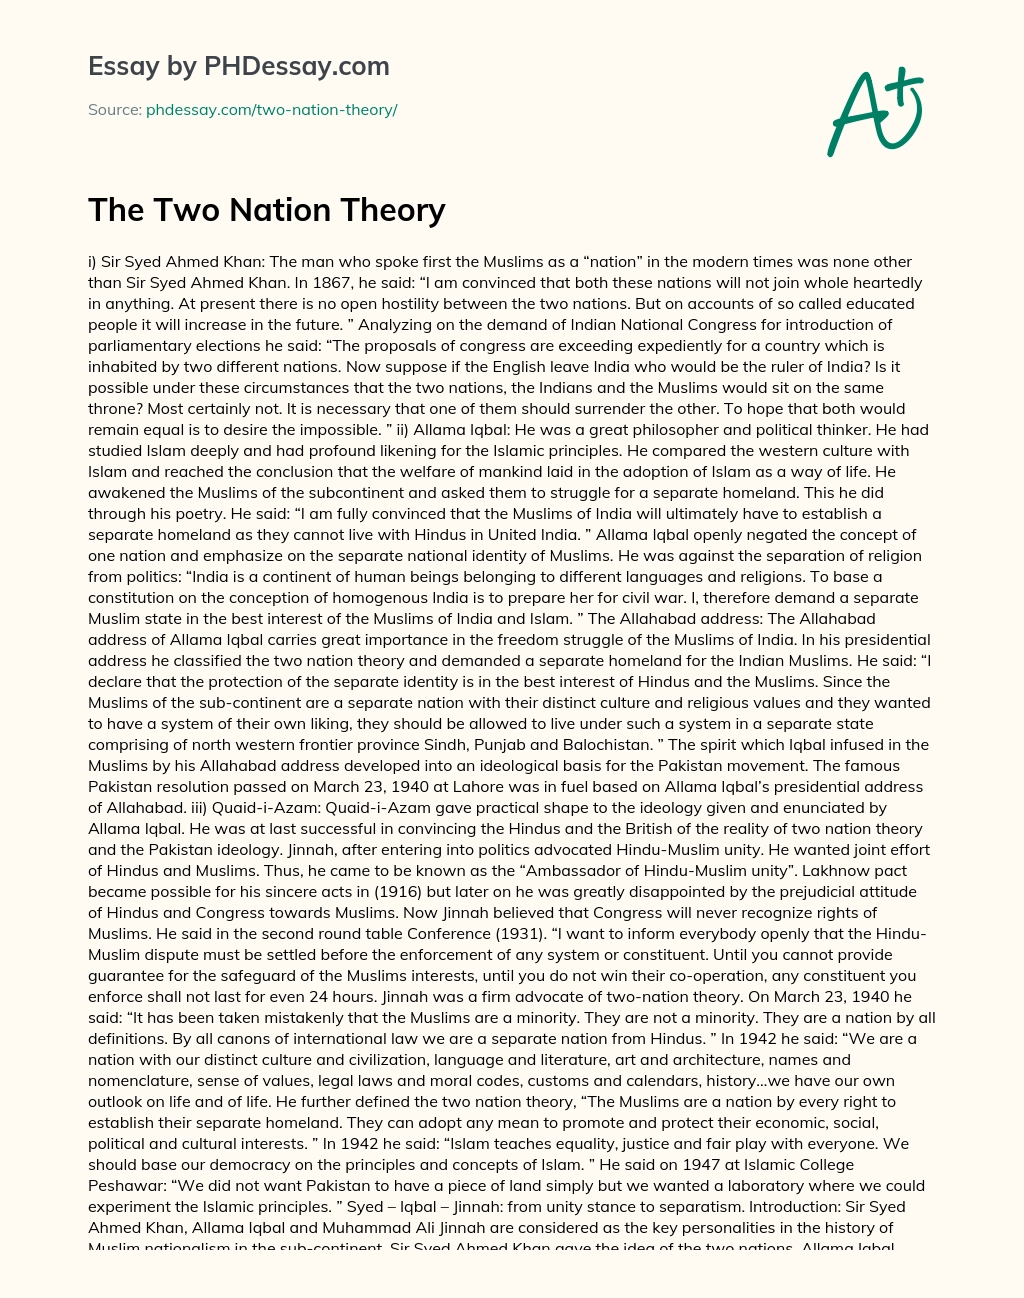 The Two Nation Theory essay